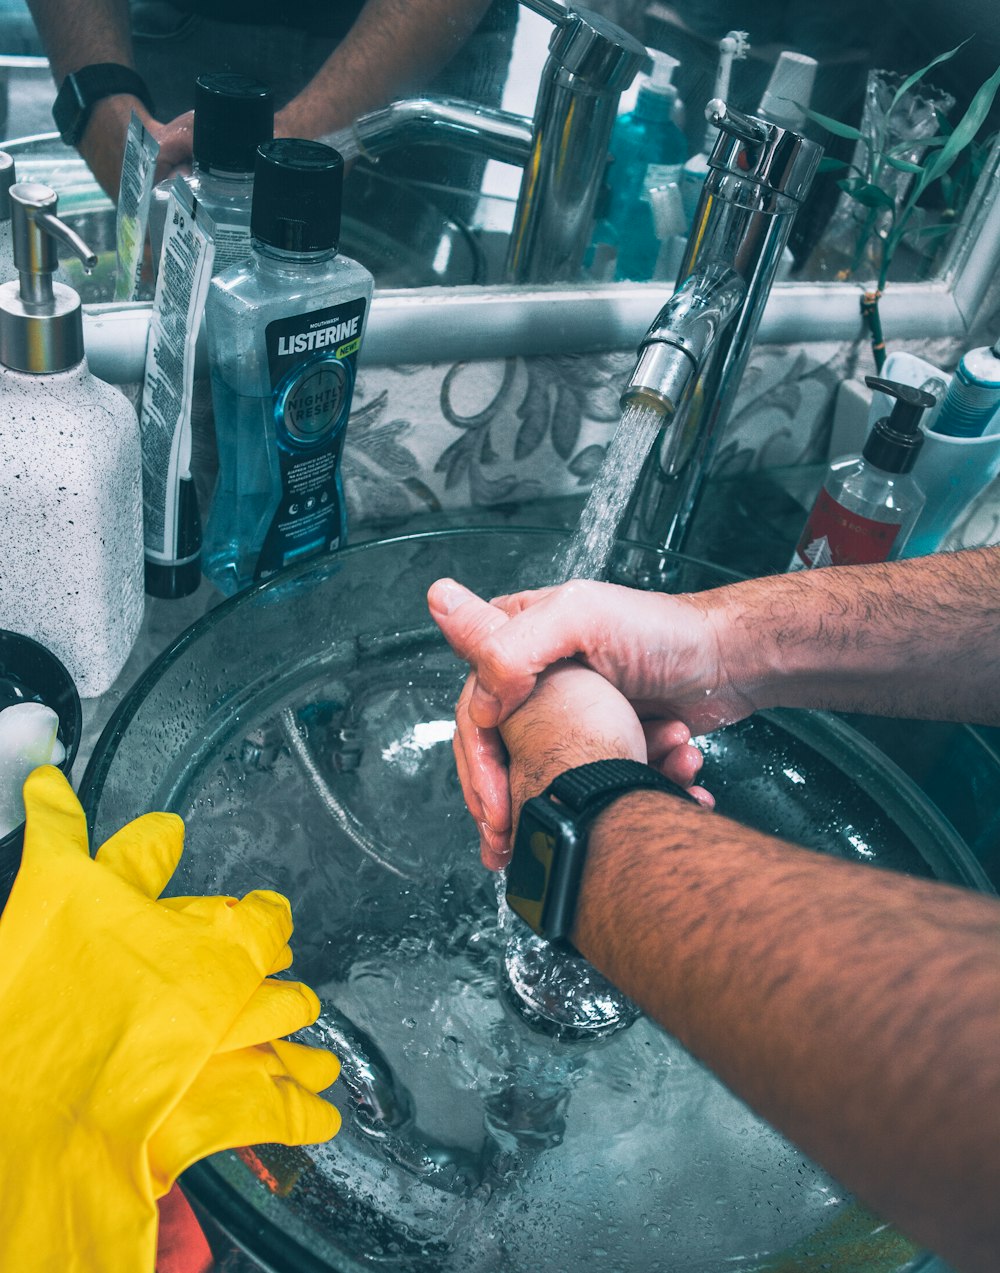 person holding yellow flower near stainless steel sink